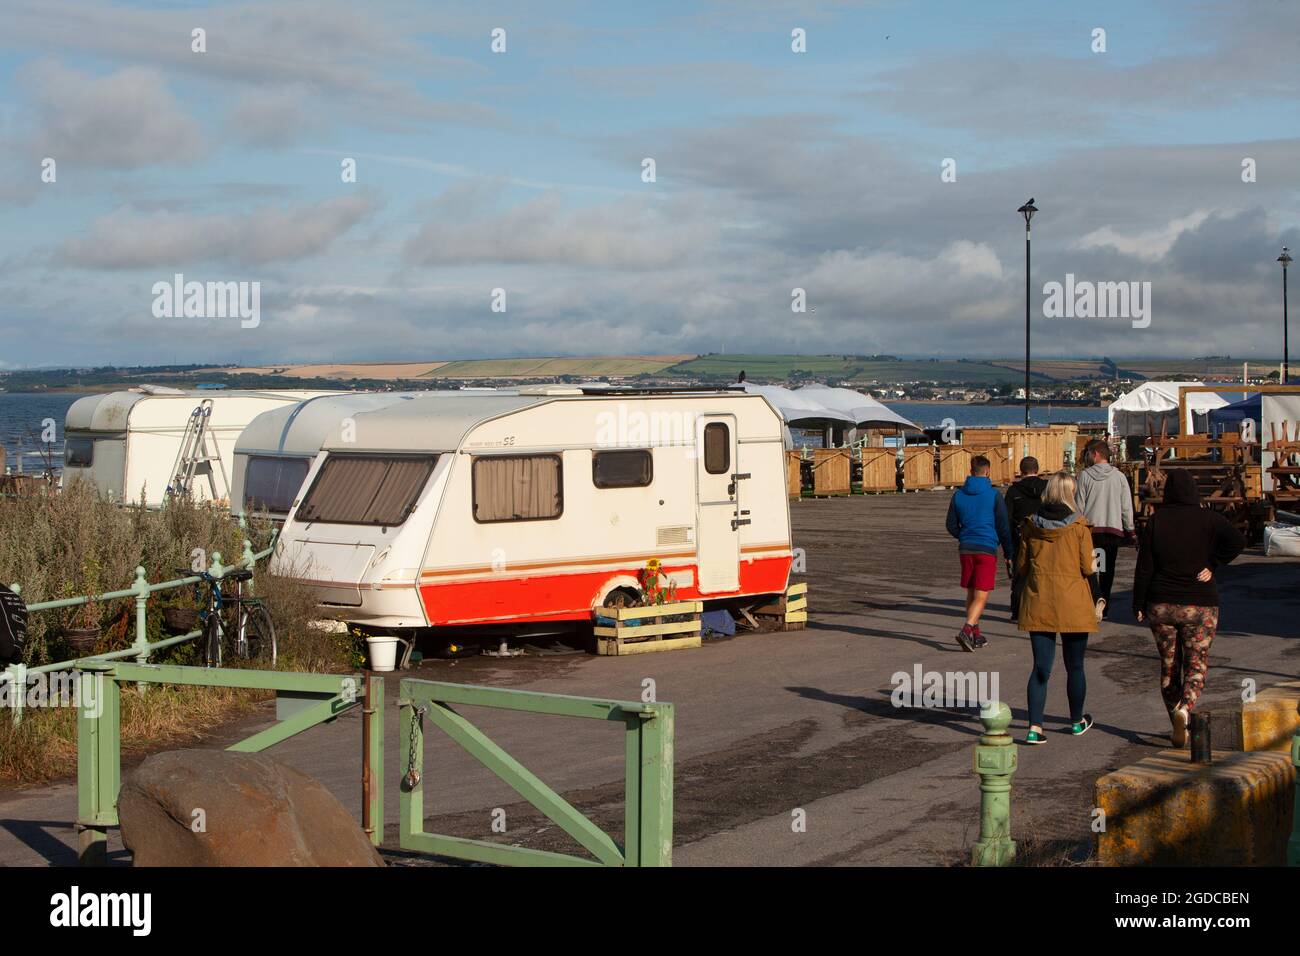 Edinburgh Scotland, UK July 31 2021; General views of caravans parked at King's Place between Portobello and Seafield and next to the sandy beach Stock Photo